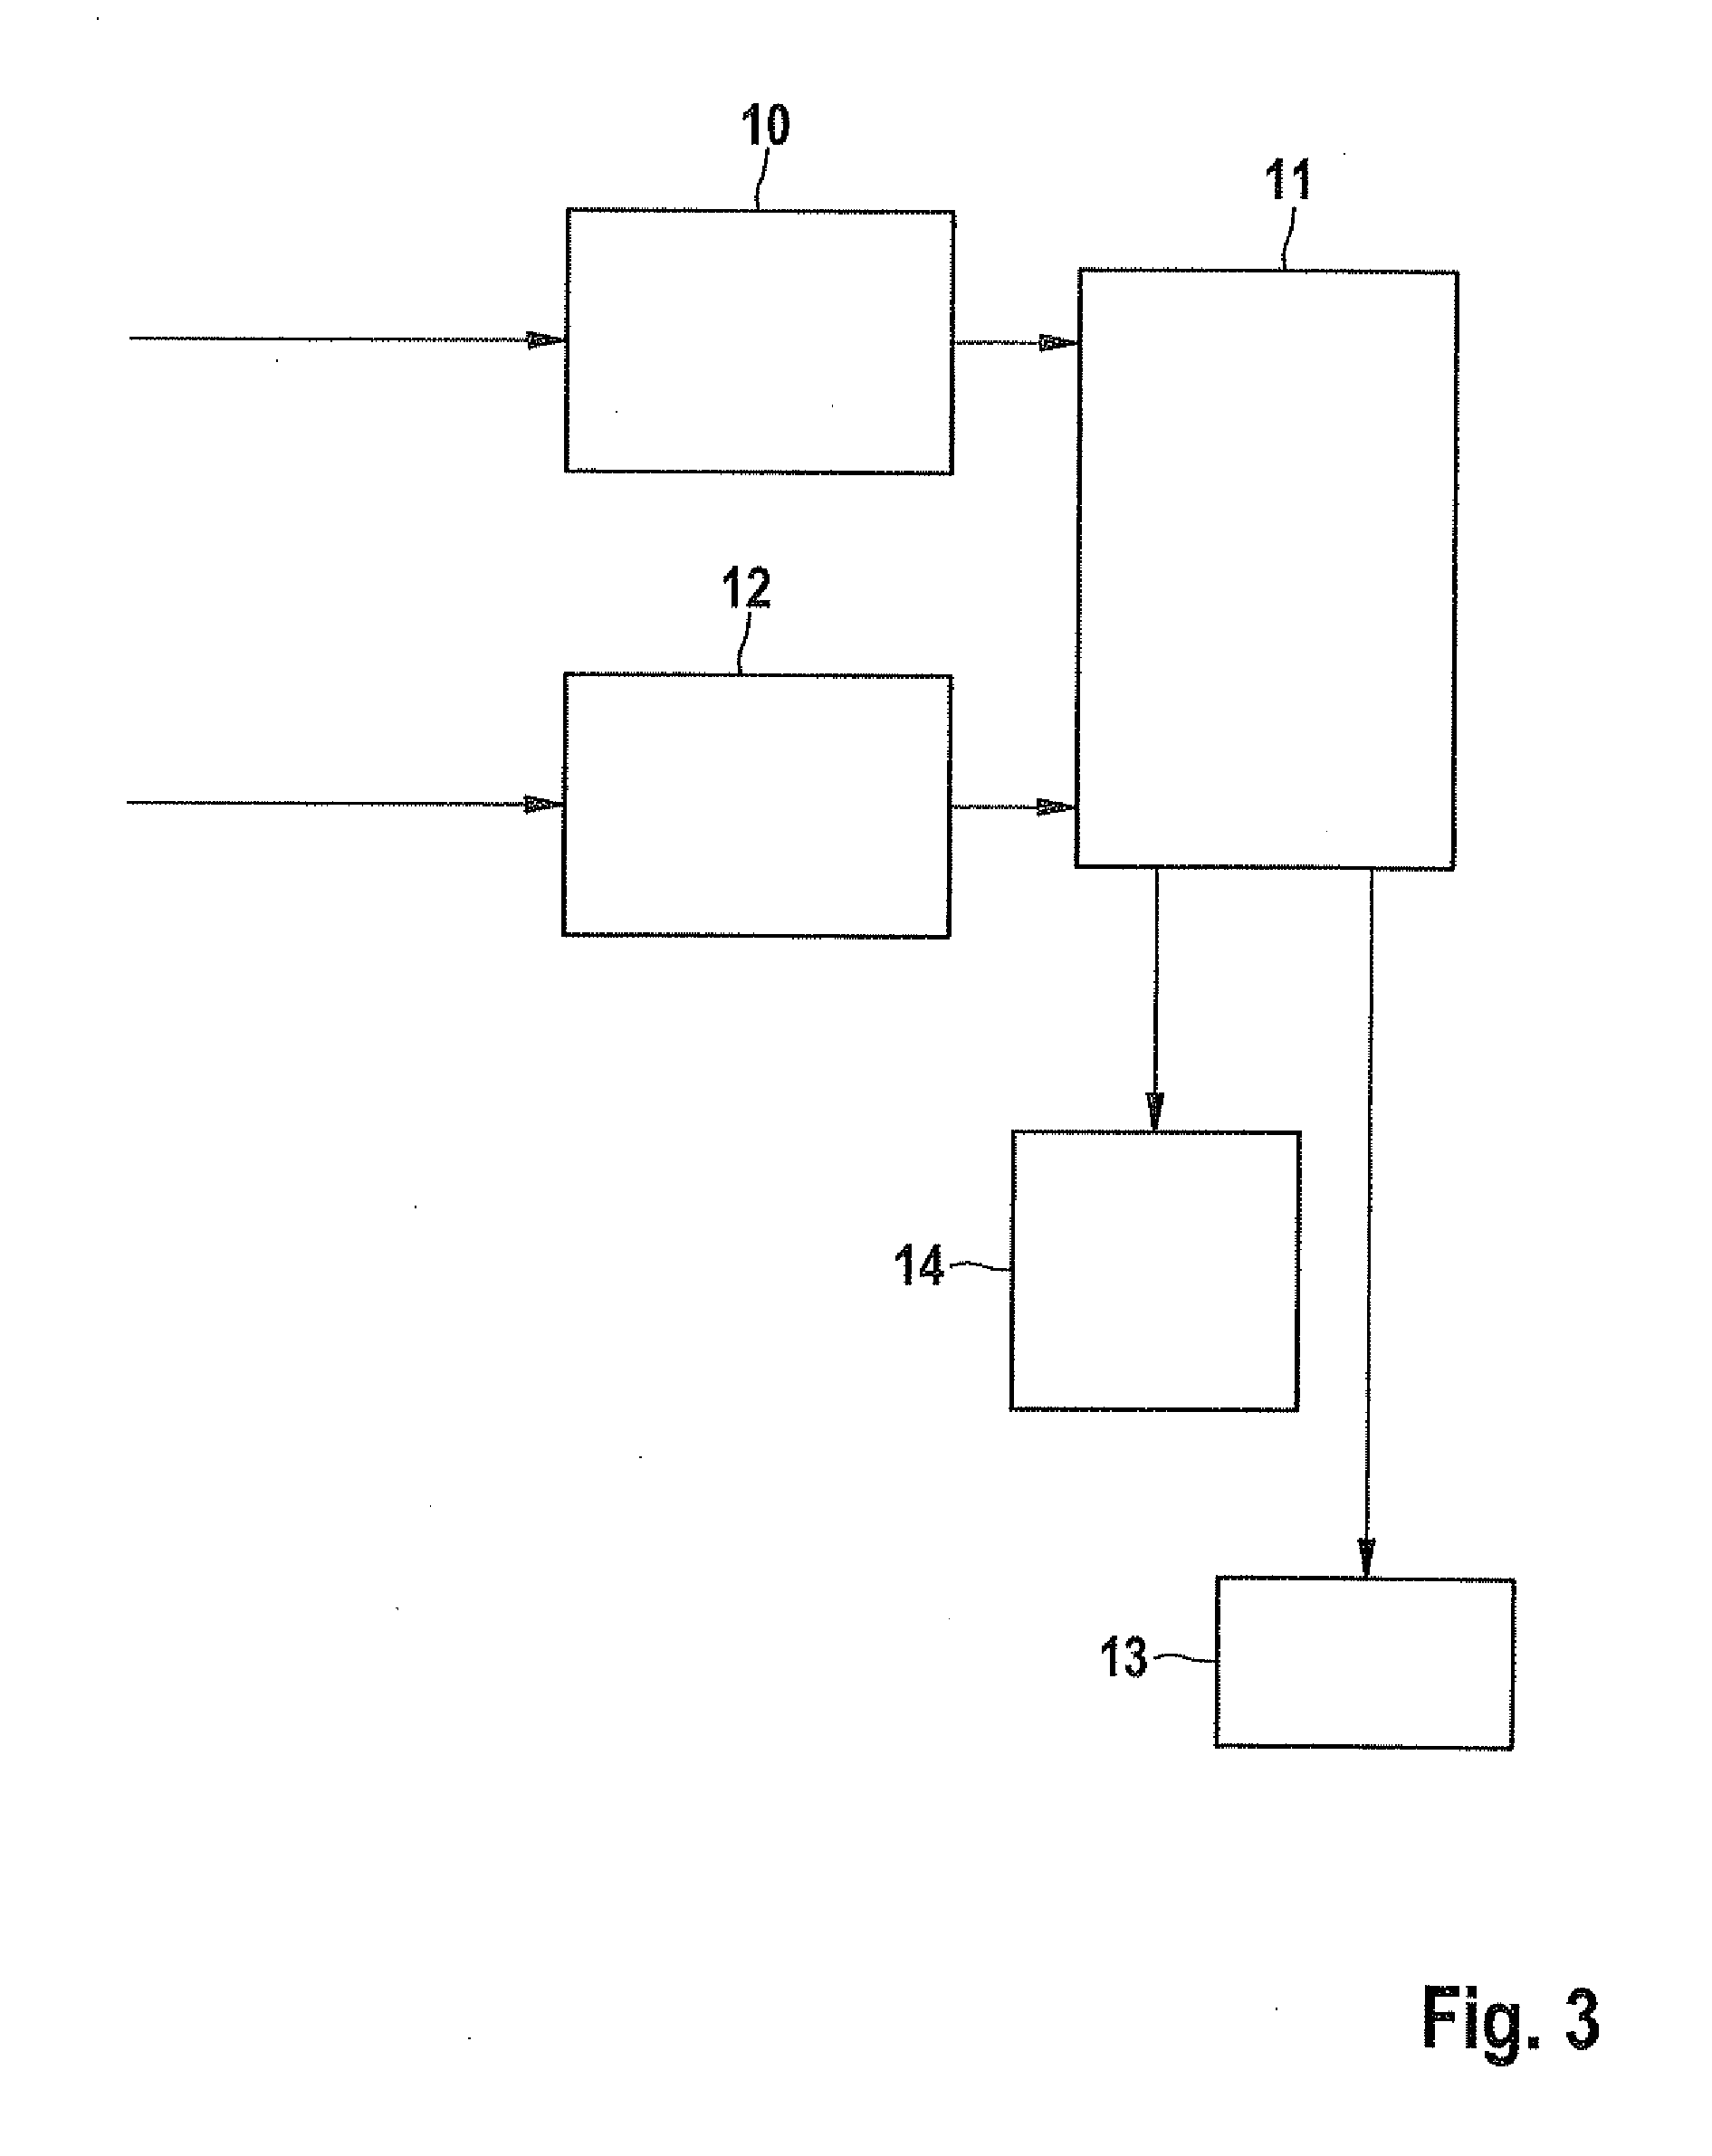 Method for improving the driving stability of a vehicle